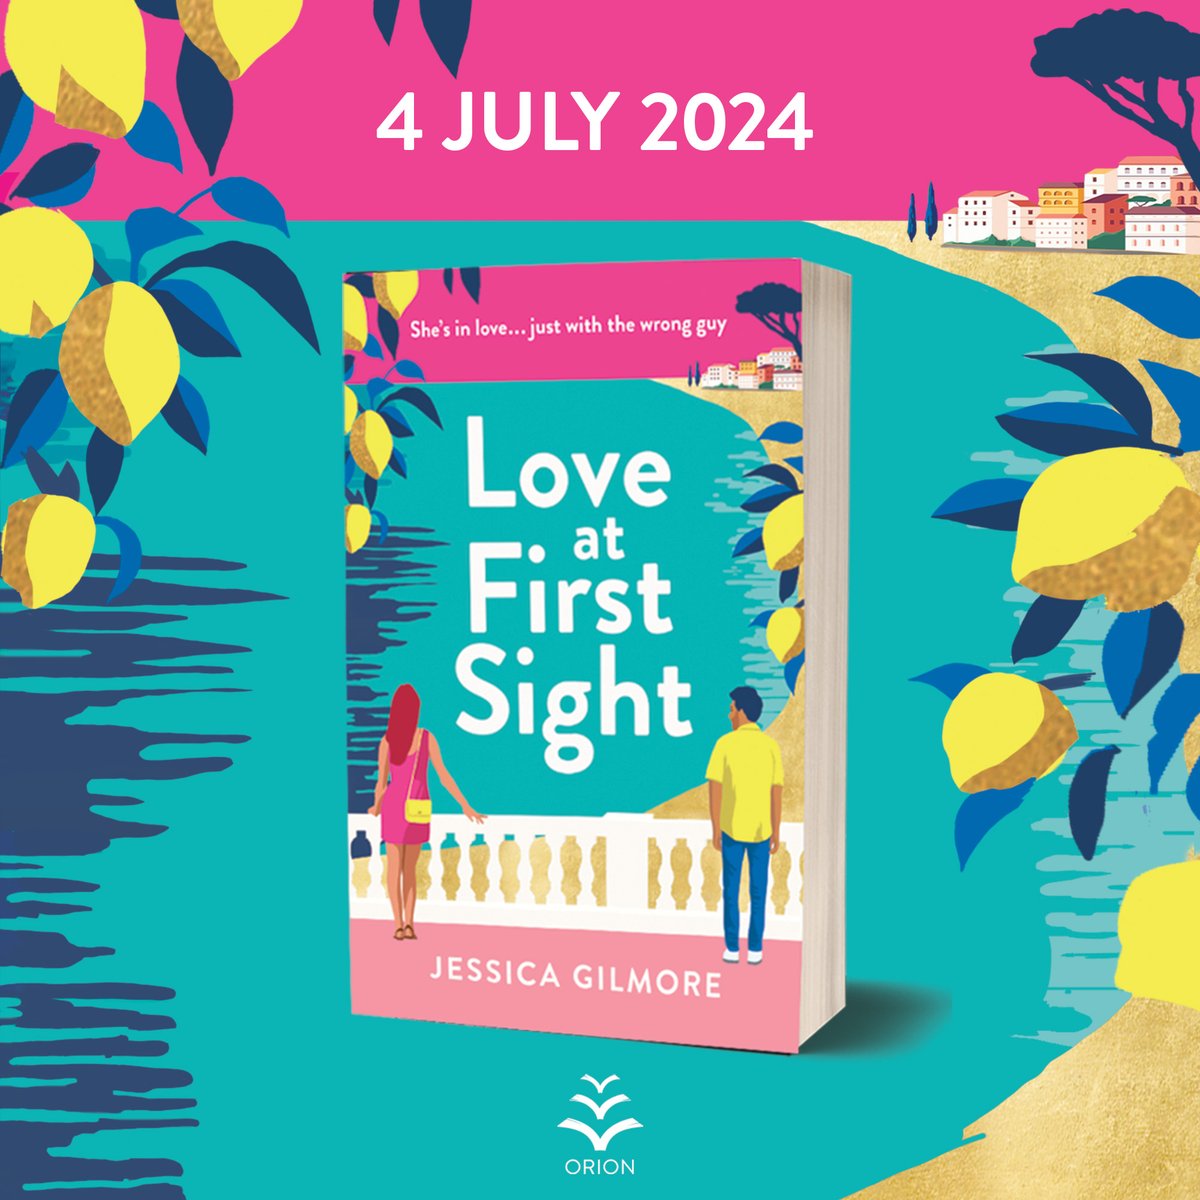 Cover reveal klaxon and it literally couldn't be prettier - summer reading sorted! geni.us/LoveFirstSight